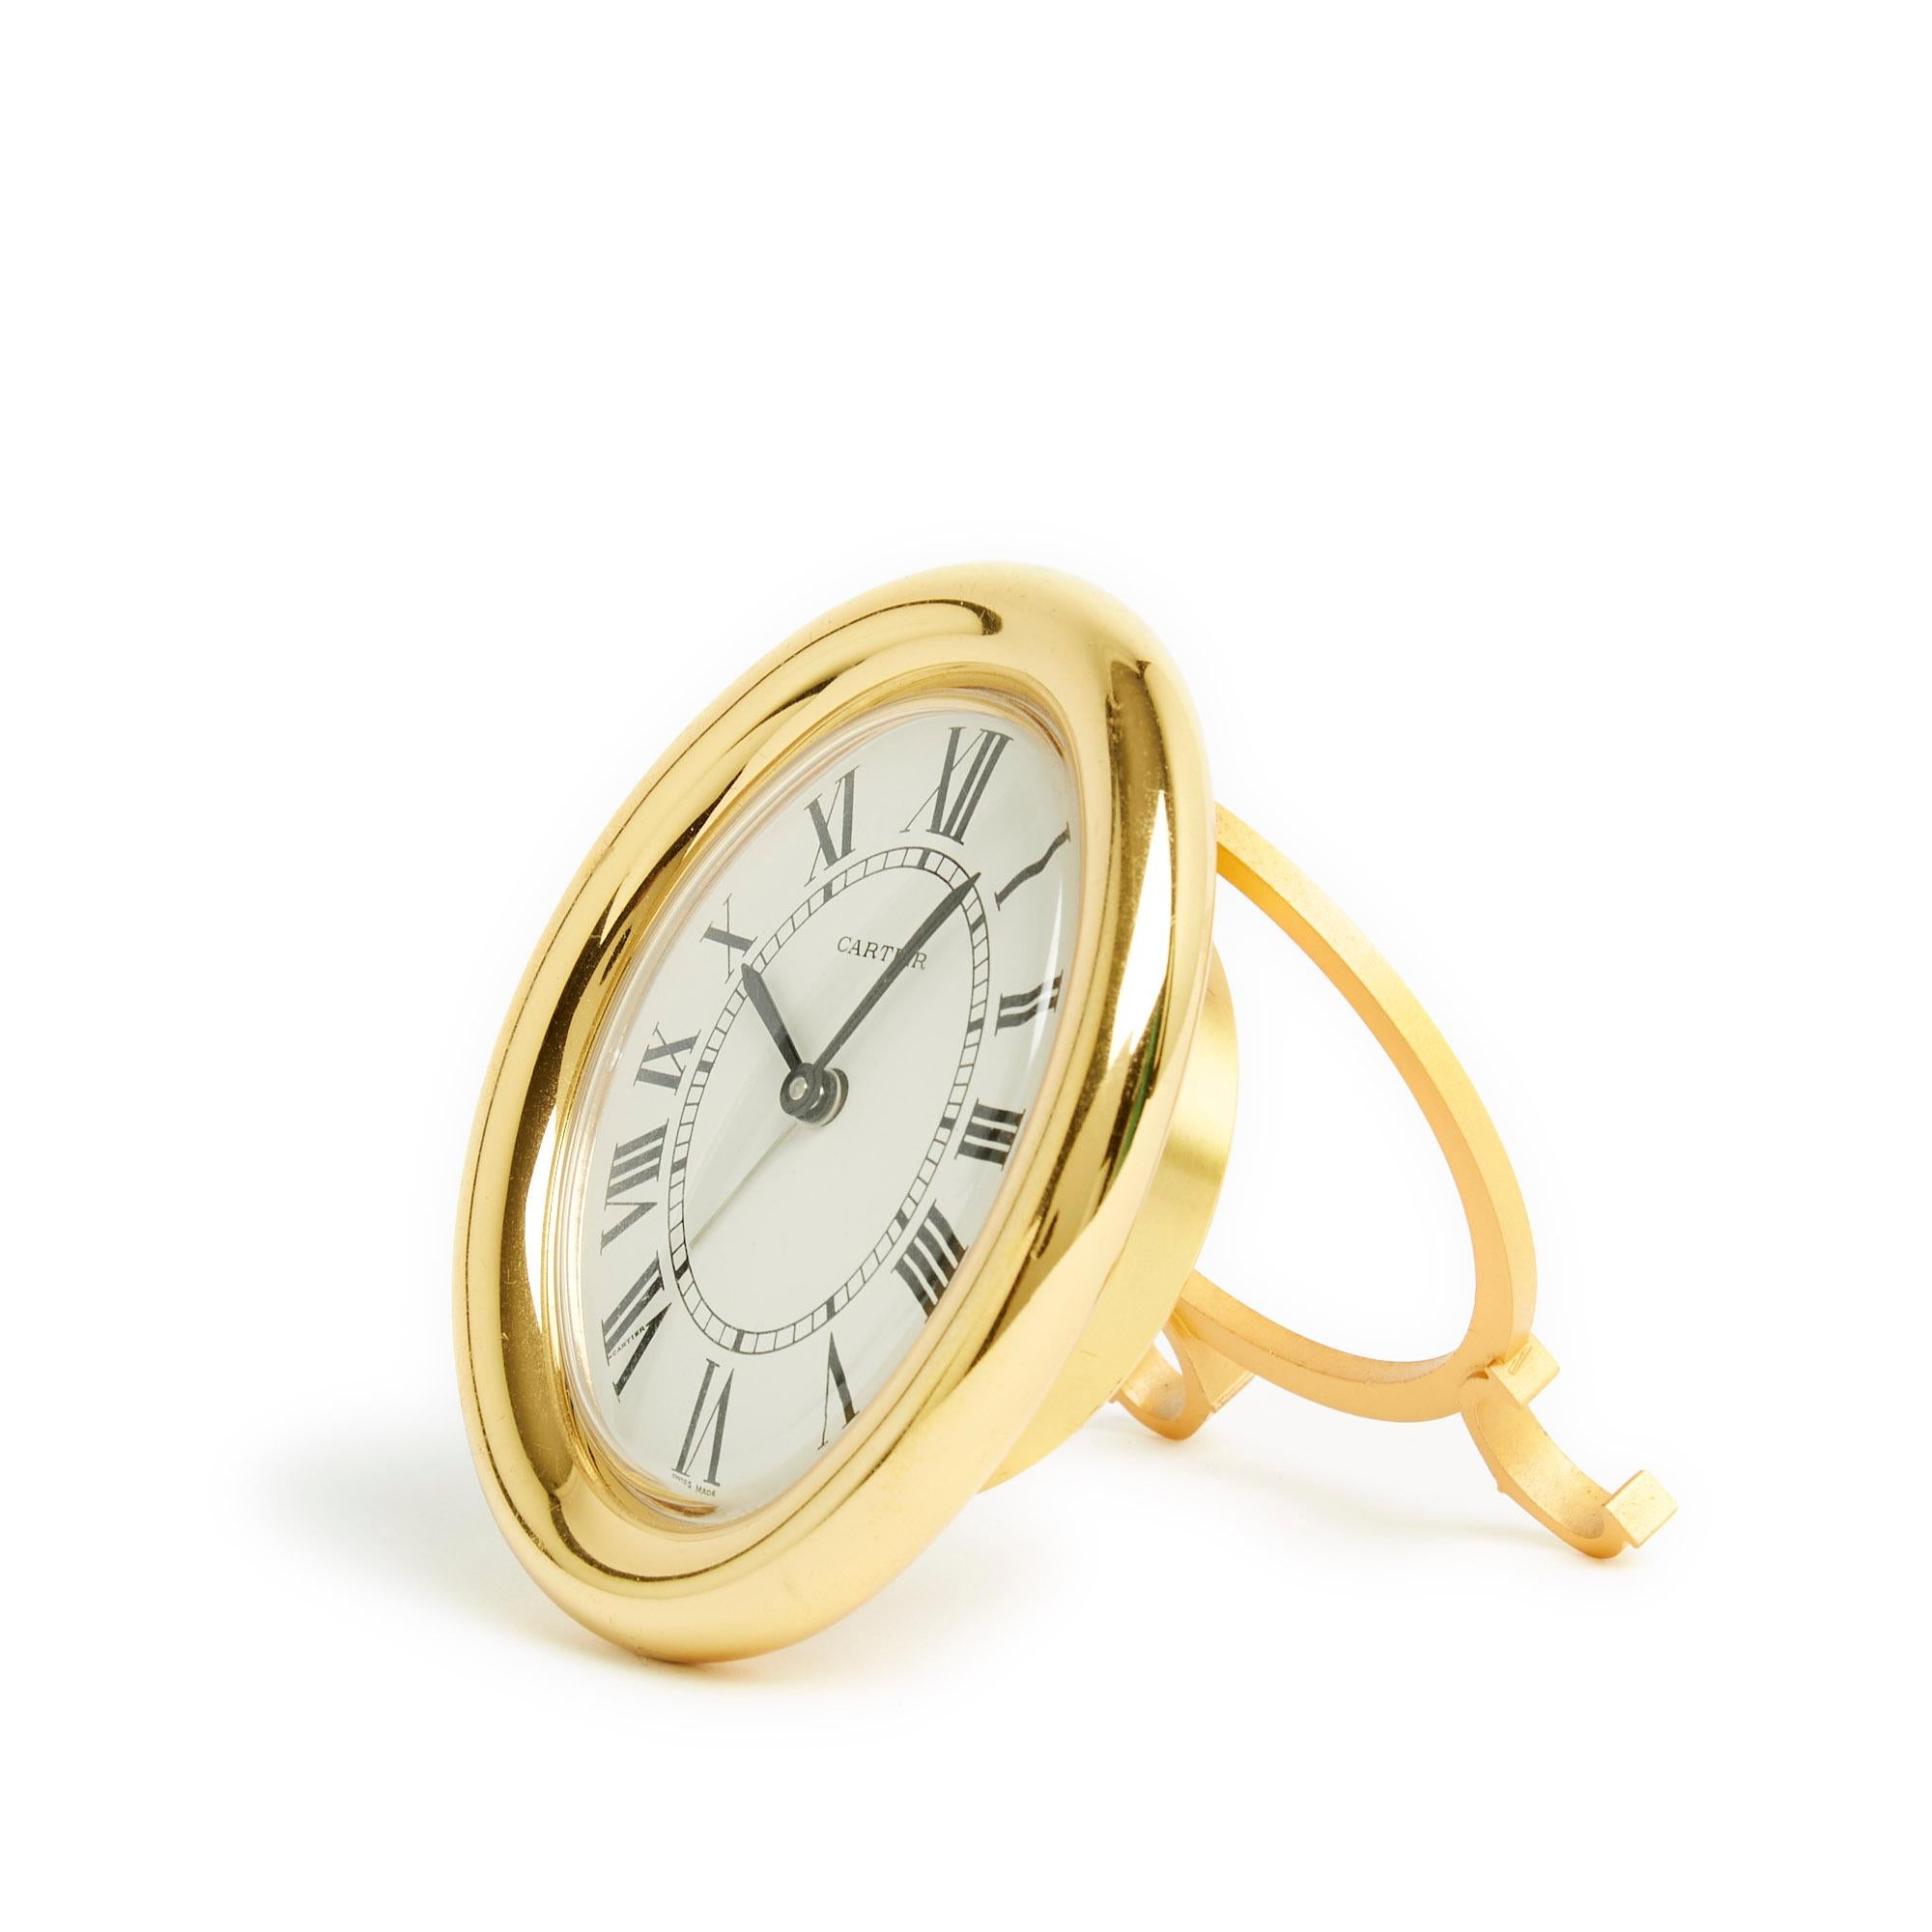 Cartier alarm clock, Baignoire model, in gold-plated metal, quartz movement, white dial with railway track and Roman numerals, 2 crowns on the back for setting the time and alarm and 1 push button for turning the clock on and off alarm clock, matt